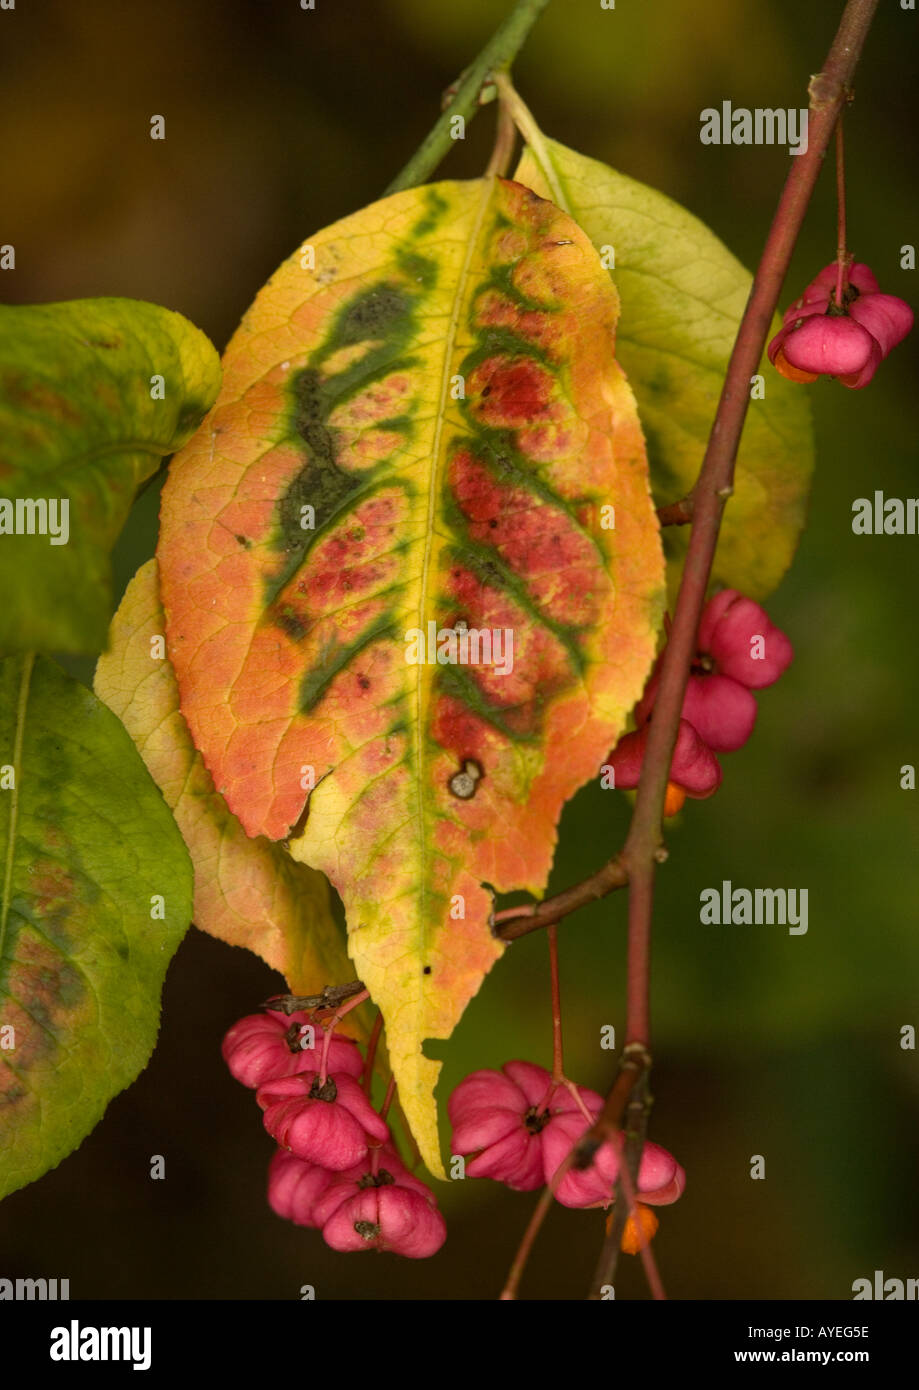 Spindle (Euonymus europaea) leaf and fruit, autumn, close-up Stock Photo